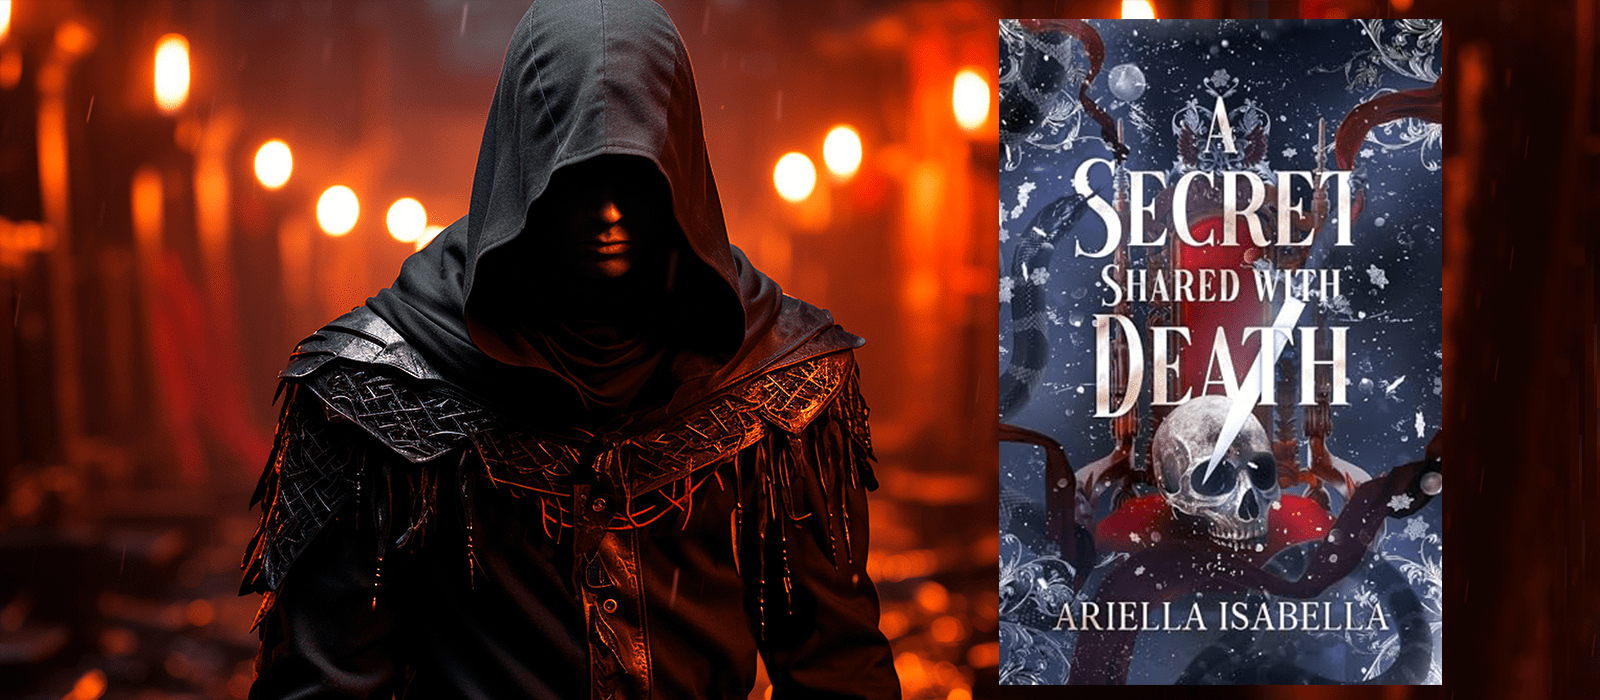 A Secret Shared with Death by Ariella Isabella